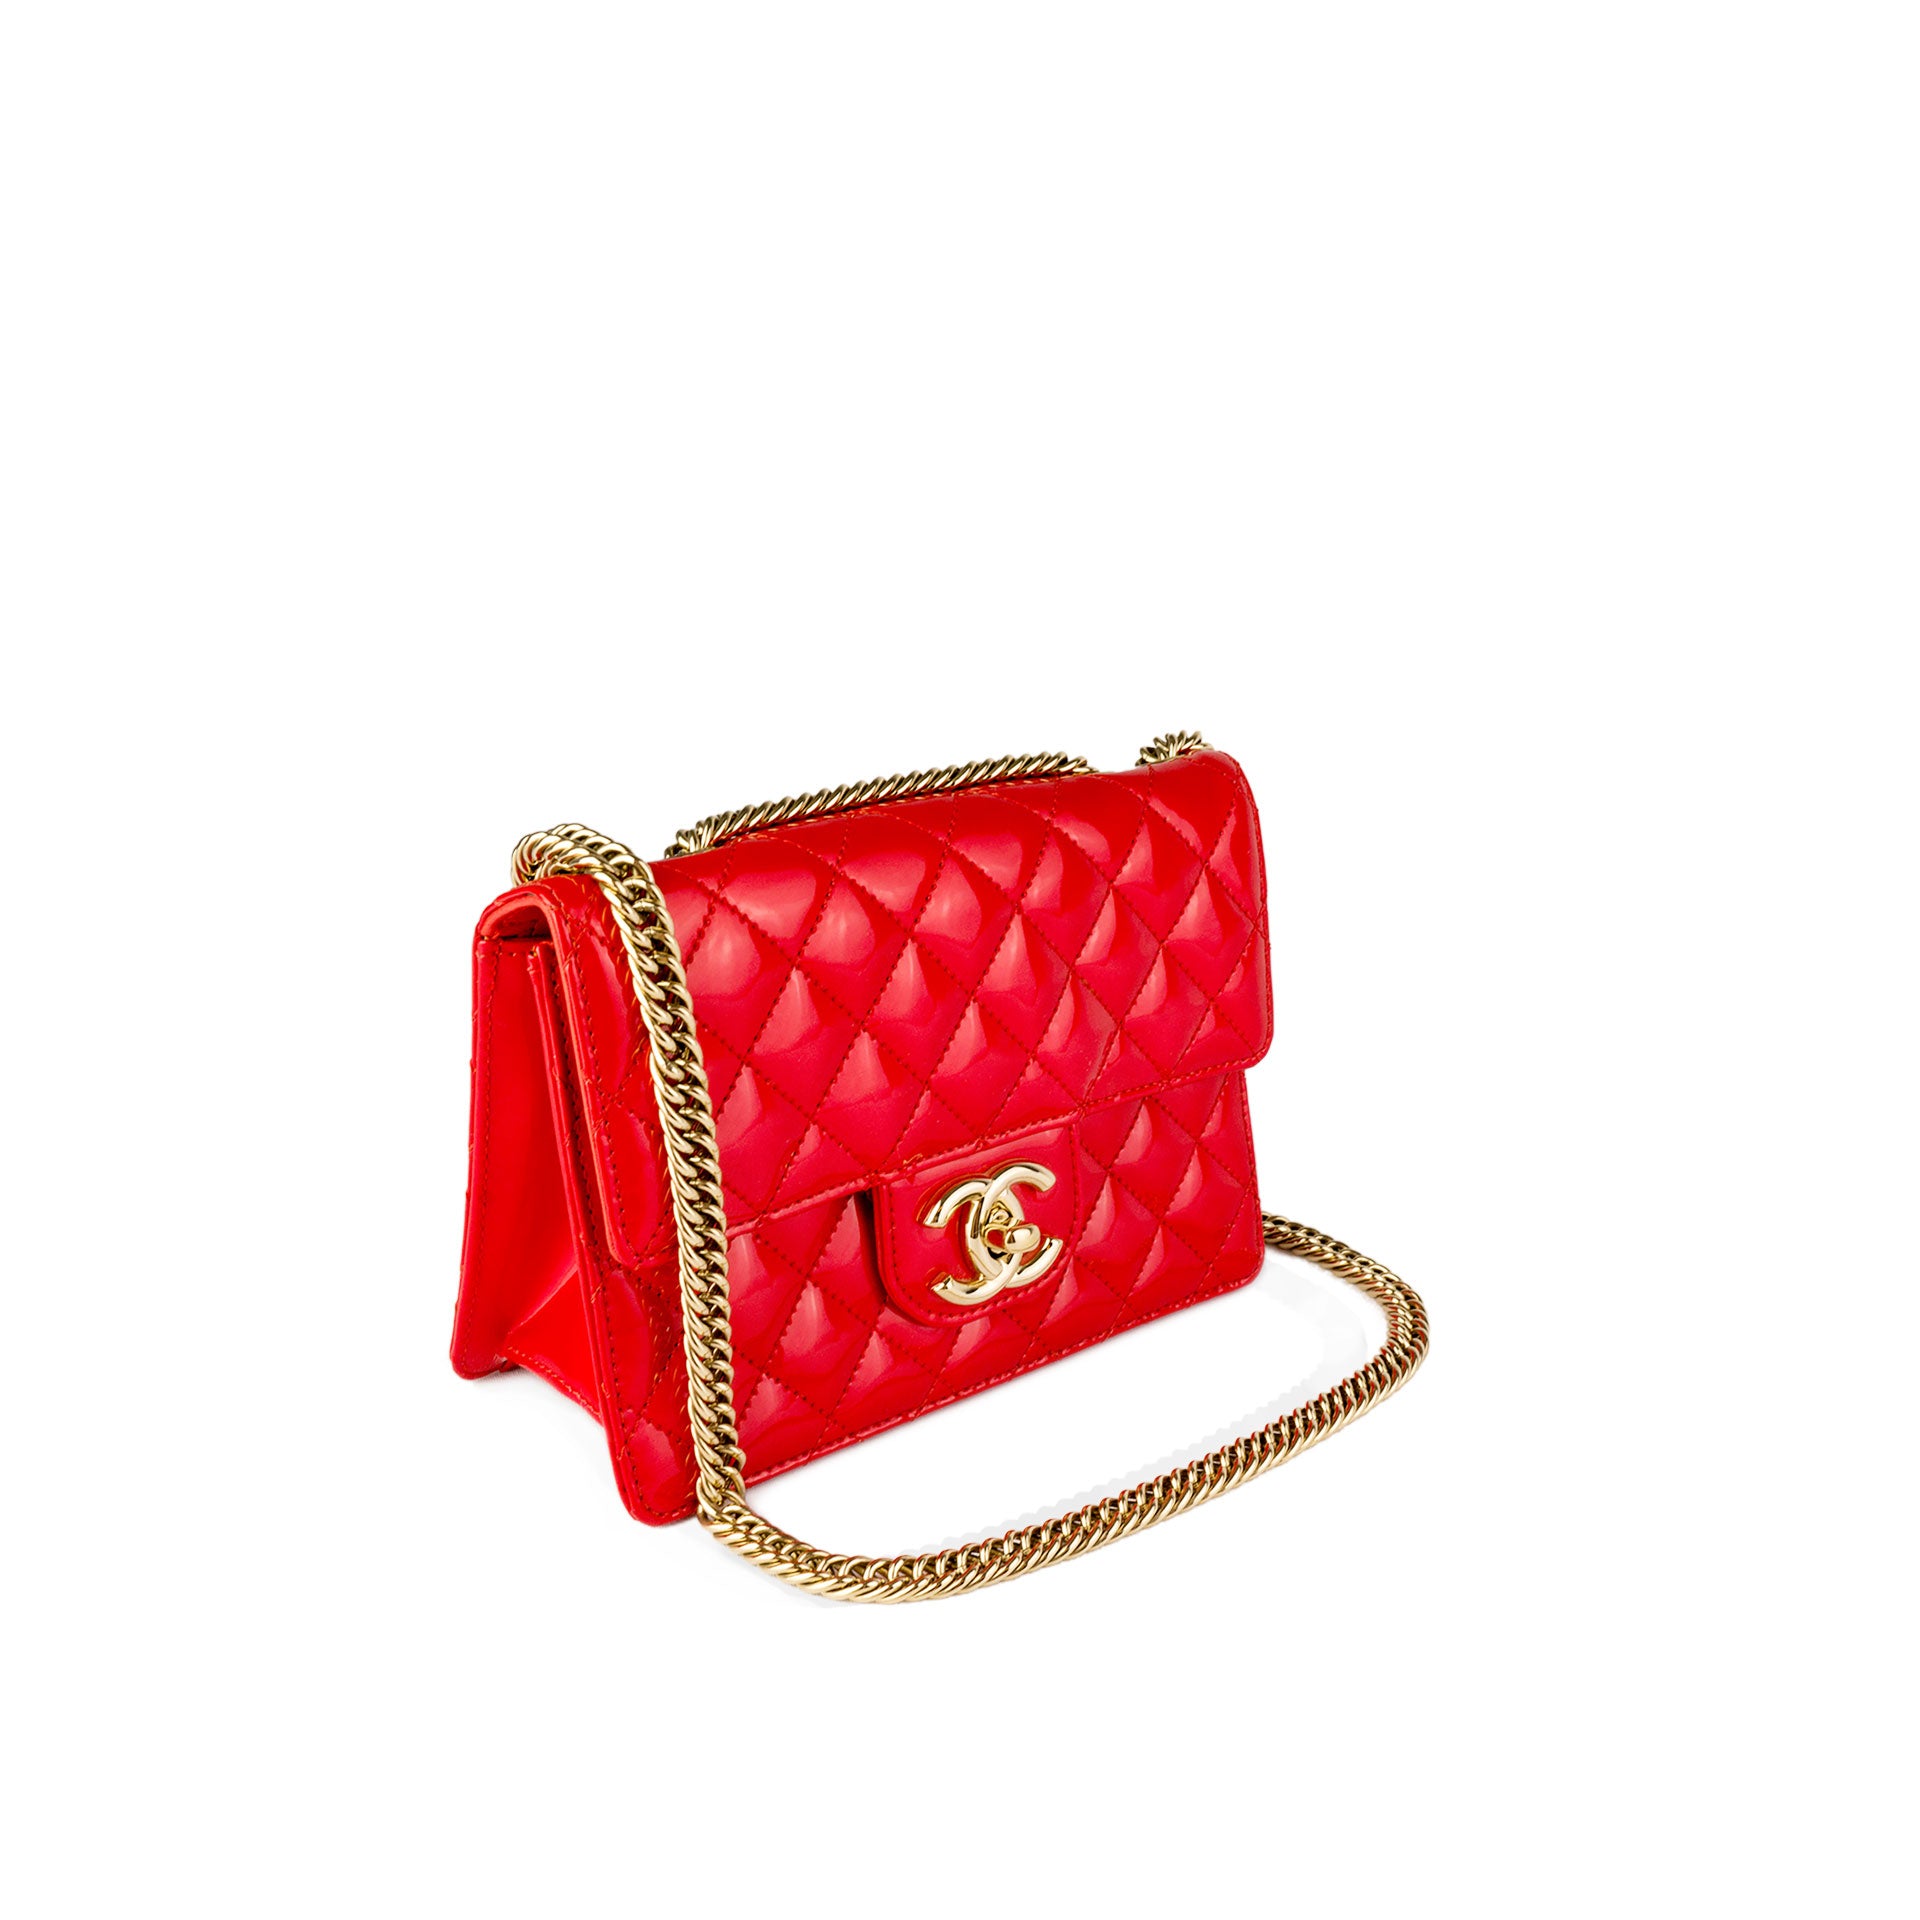 chanel classic flap bag vintage red